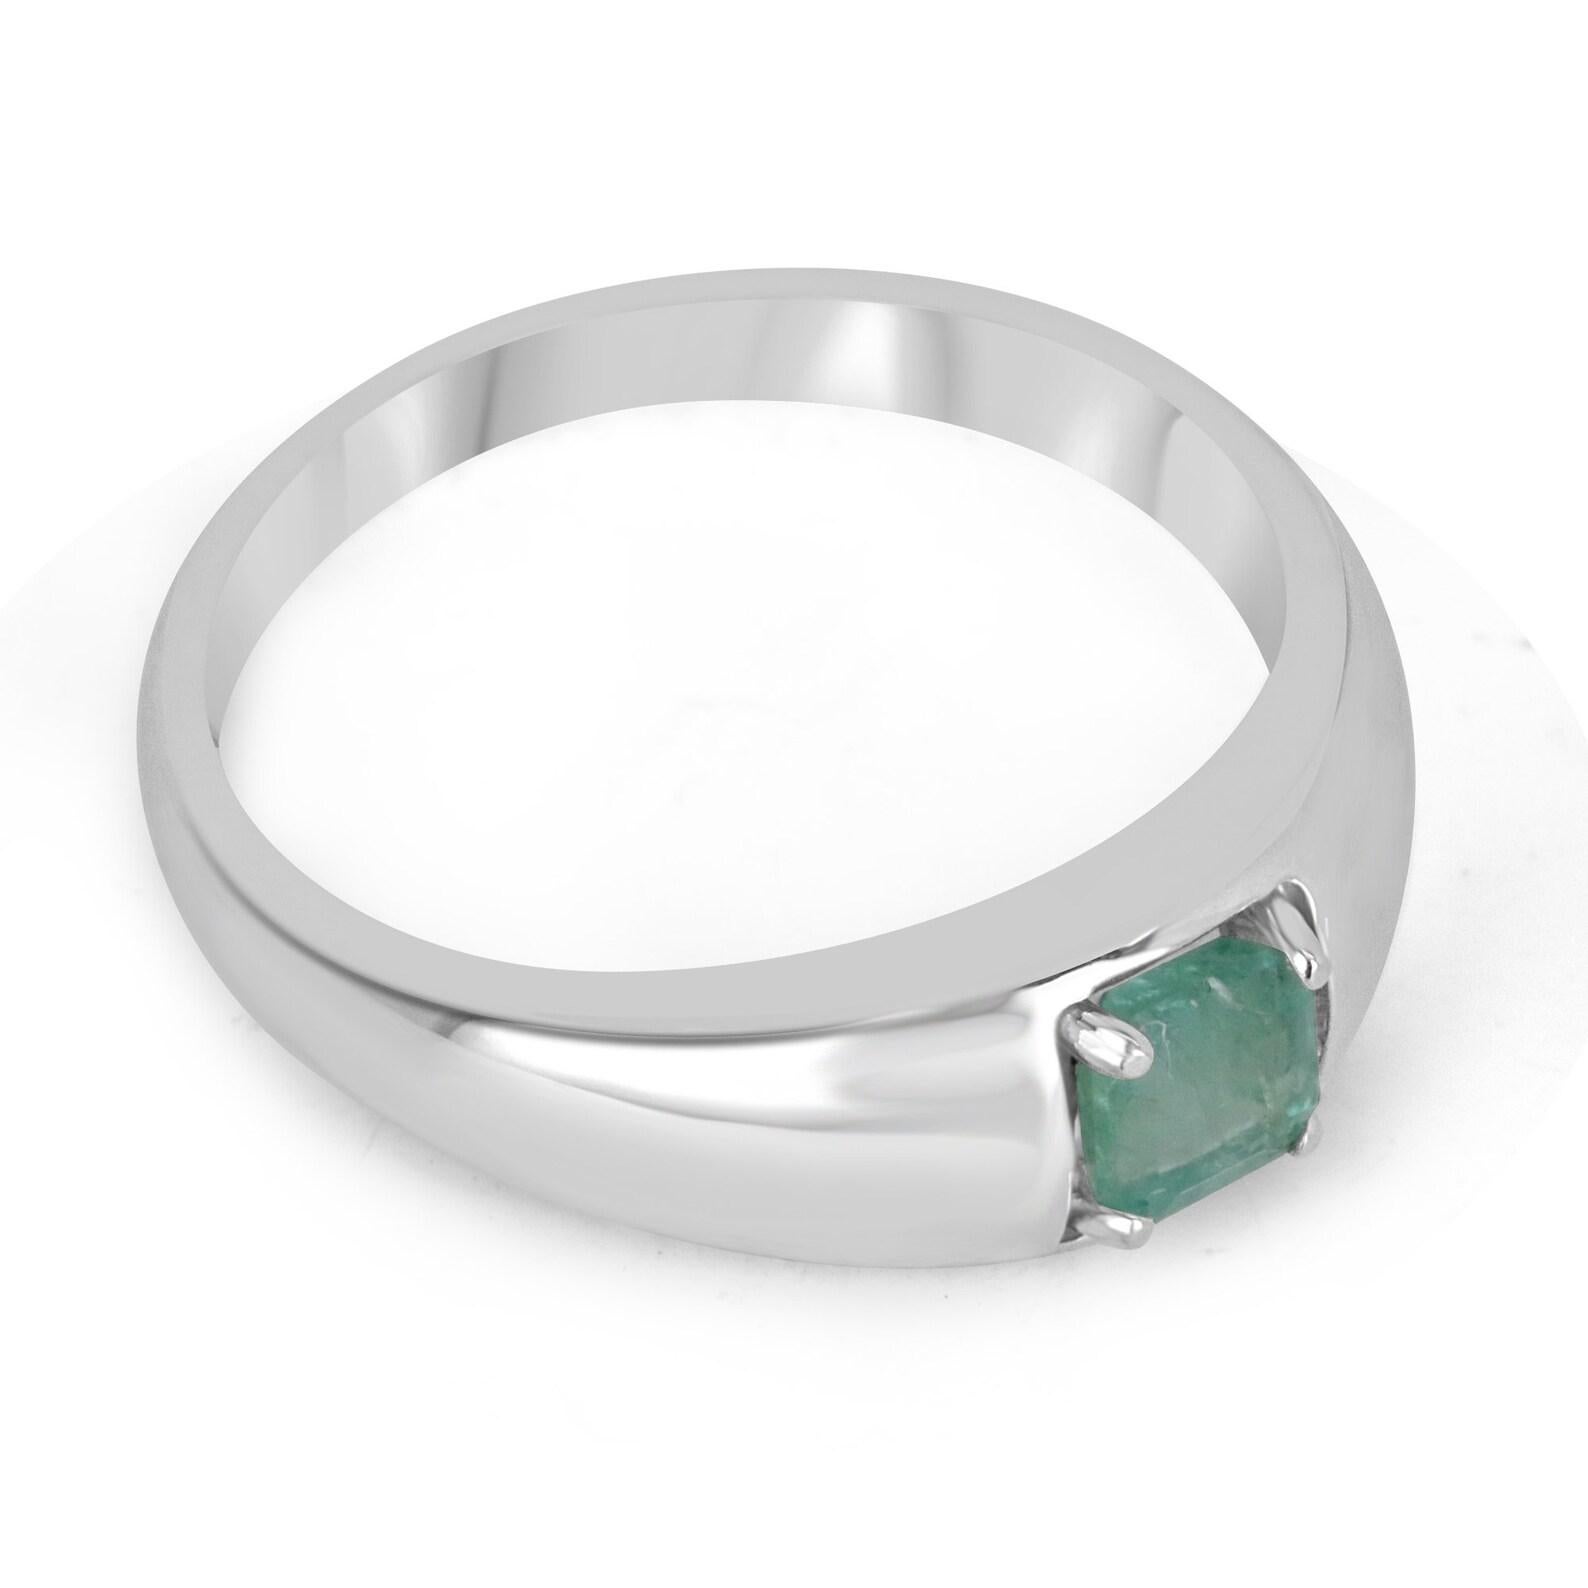 A pretty emerald solitaire ring. This piece features a natural Asscher cut emerald set in a simple four-prong setting, crafted in sterling silver.

Setting Style: Prong
Setting Material: Sterling Silver .925

Main Stone: Emerald
Shape: Asscher